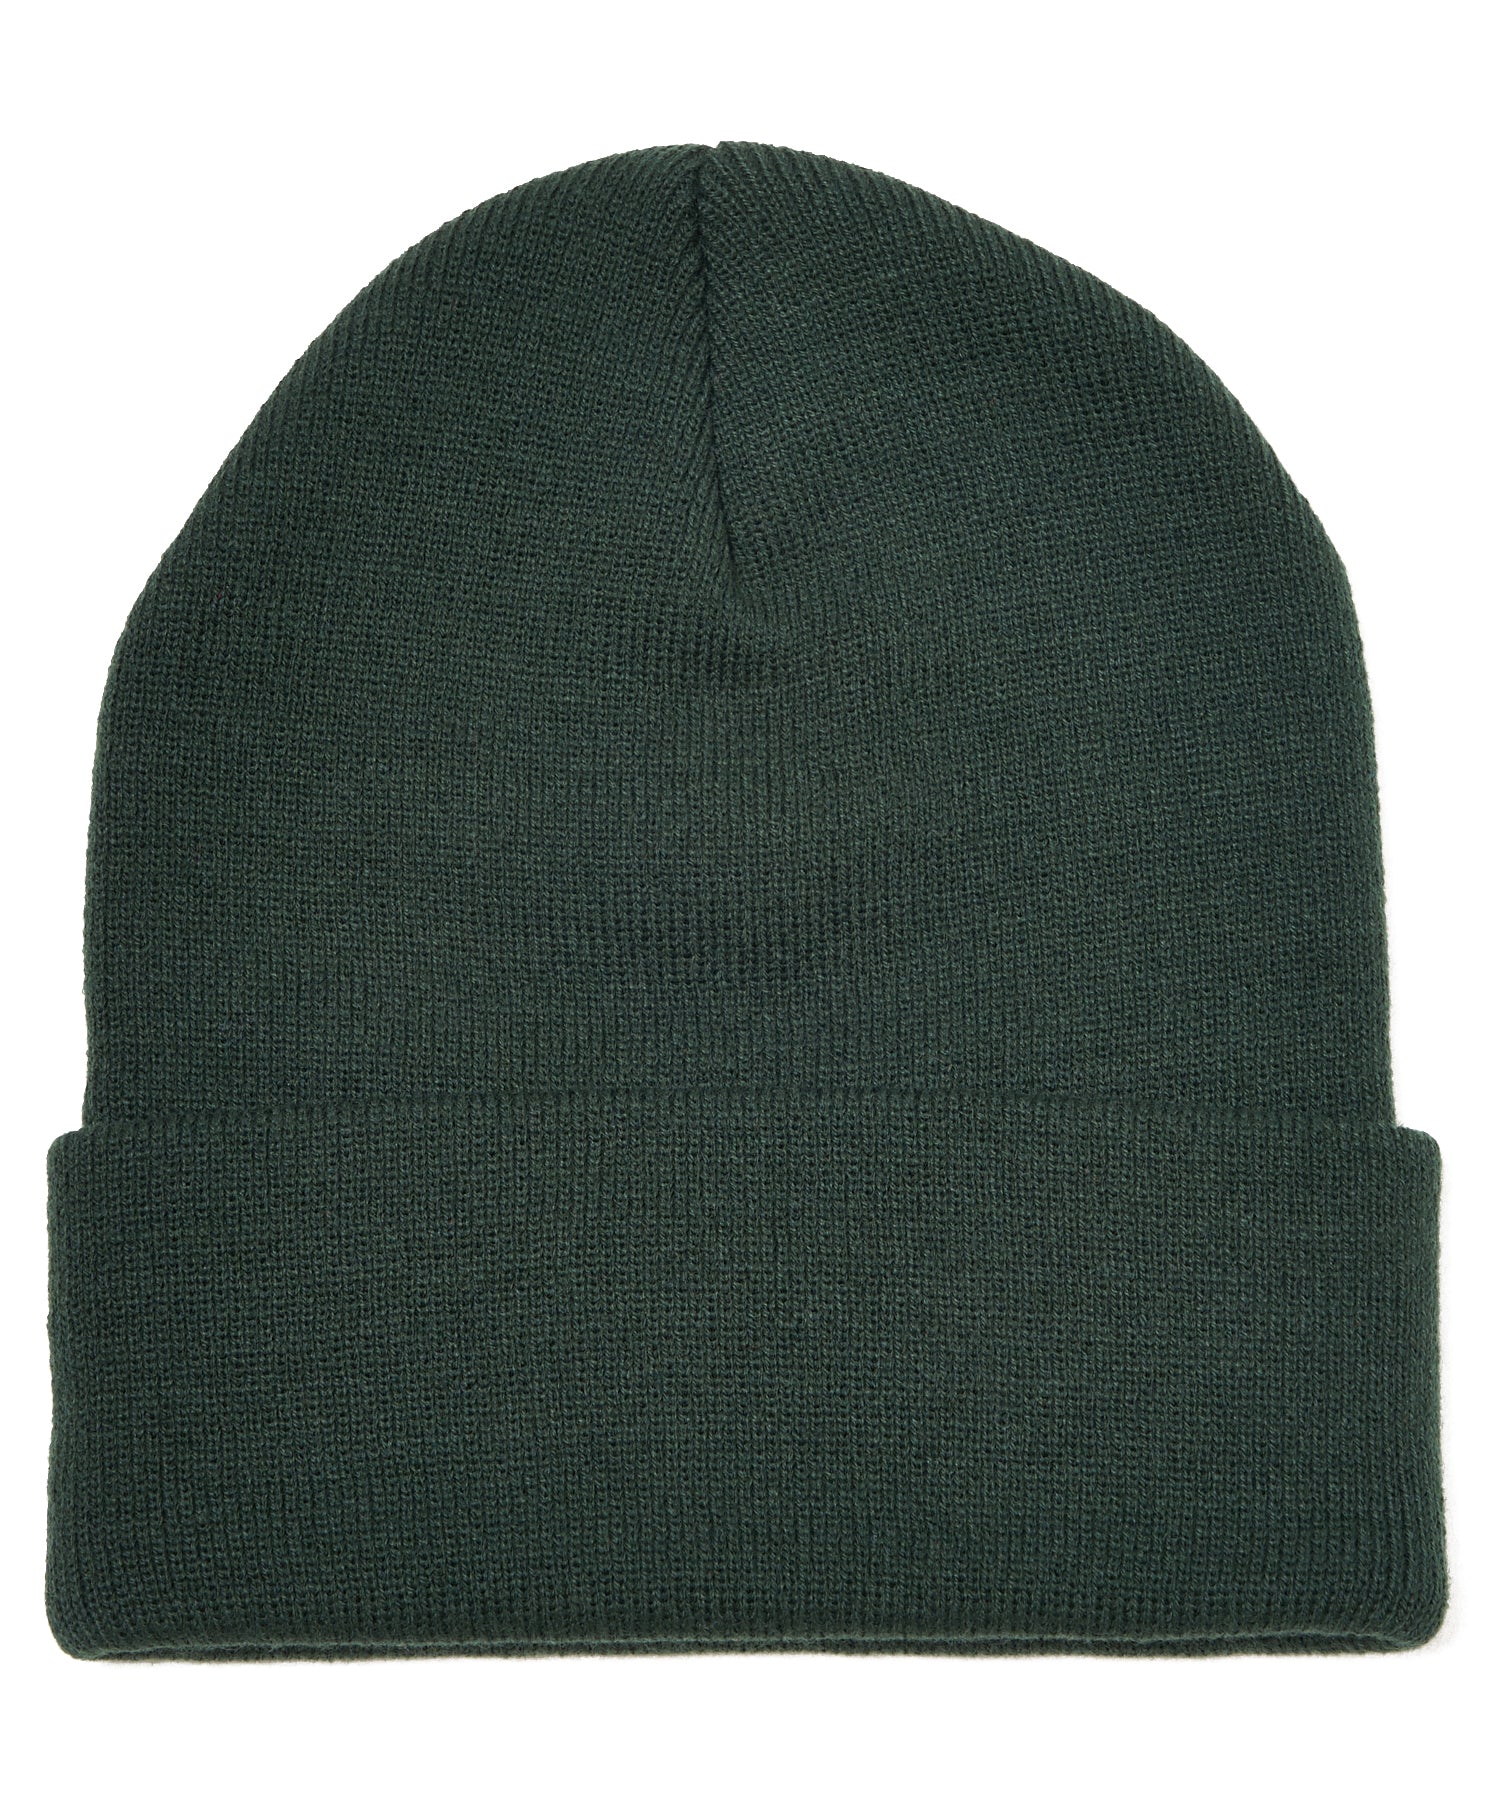 EMBROIDERY KNIT BEANIE